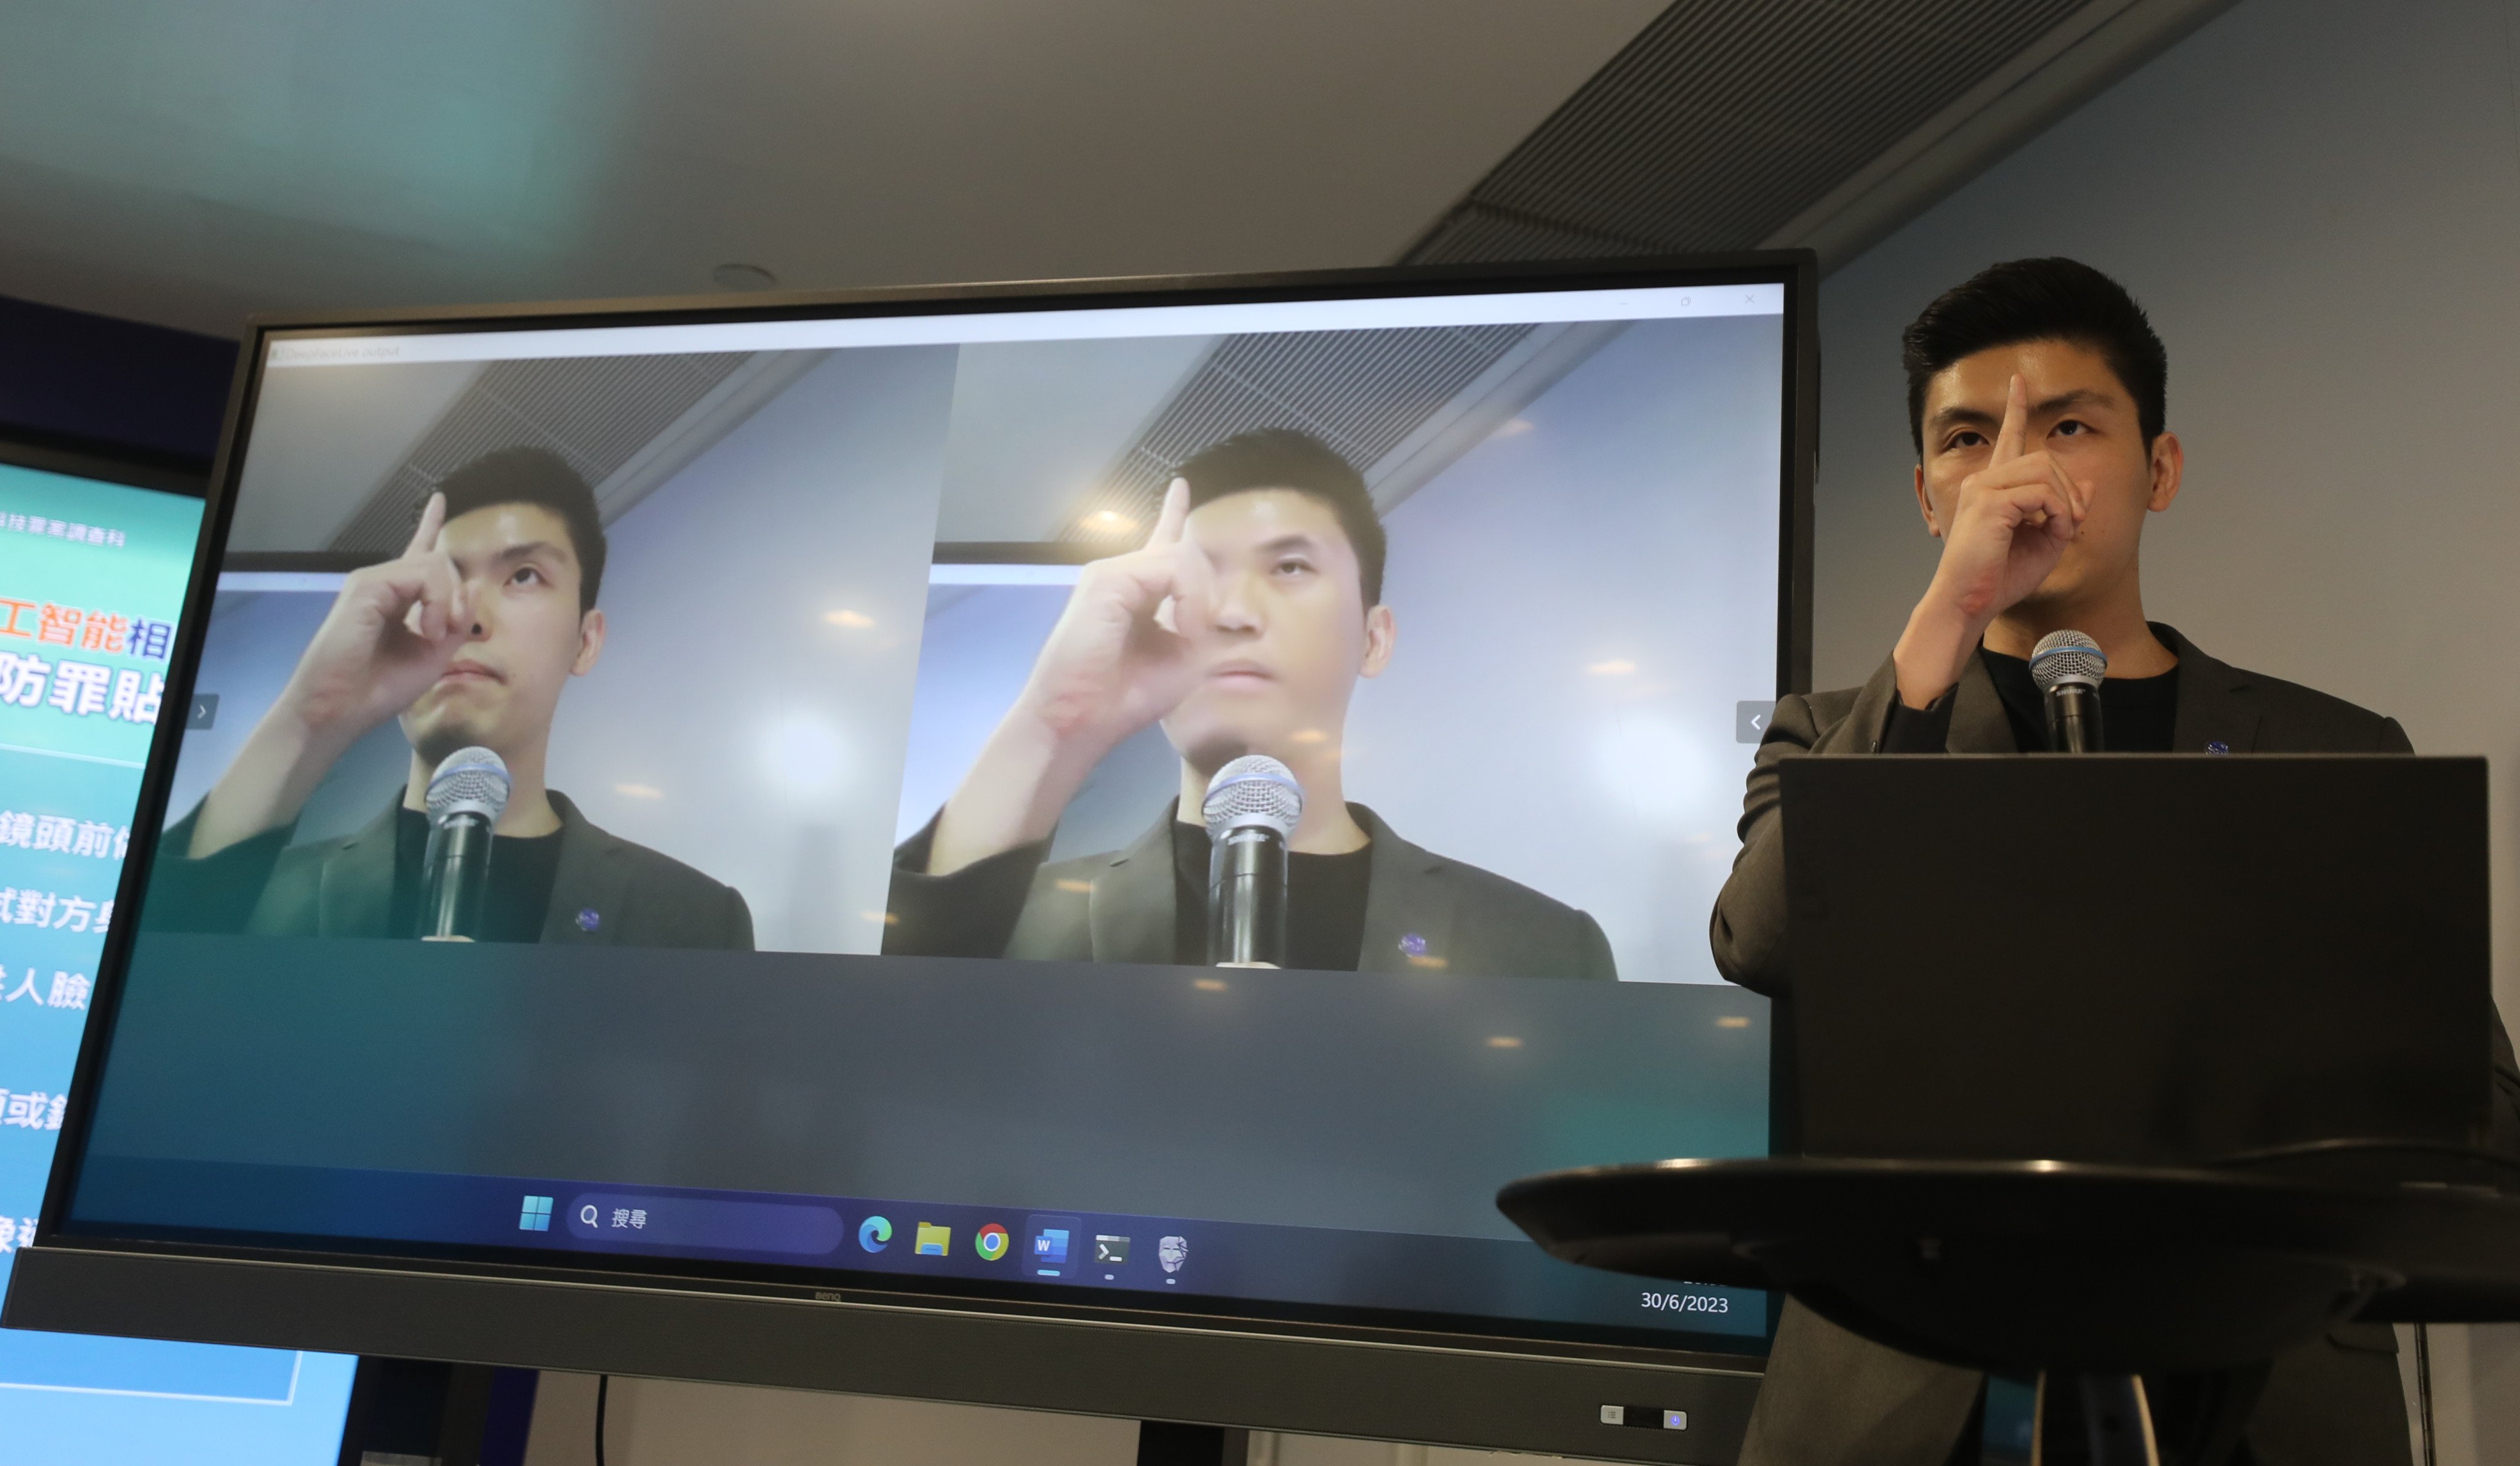 A Hong Hong police officer demonstrates how to tell and prevent AI-related deceptions at a press briefing on June 30 last year. While deepfakes are a formidable challenge, a well-prepared organisation doesn’t have to fall victim. Photo: Xiaomei Chen